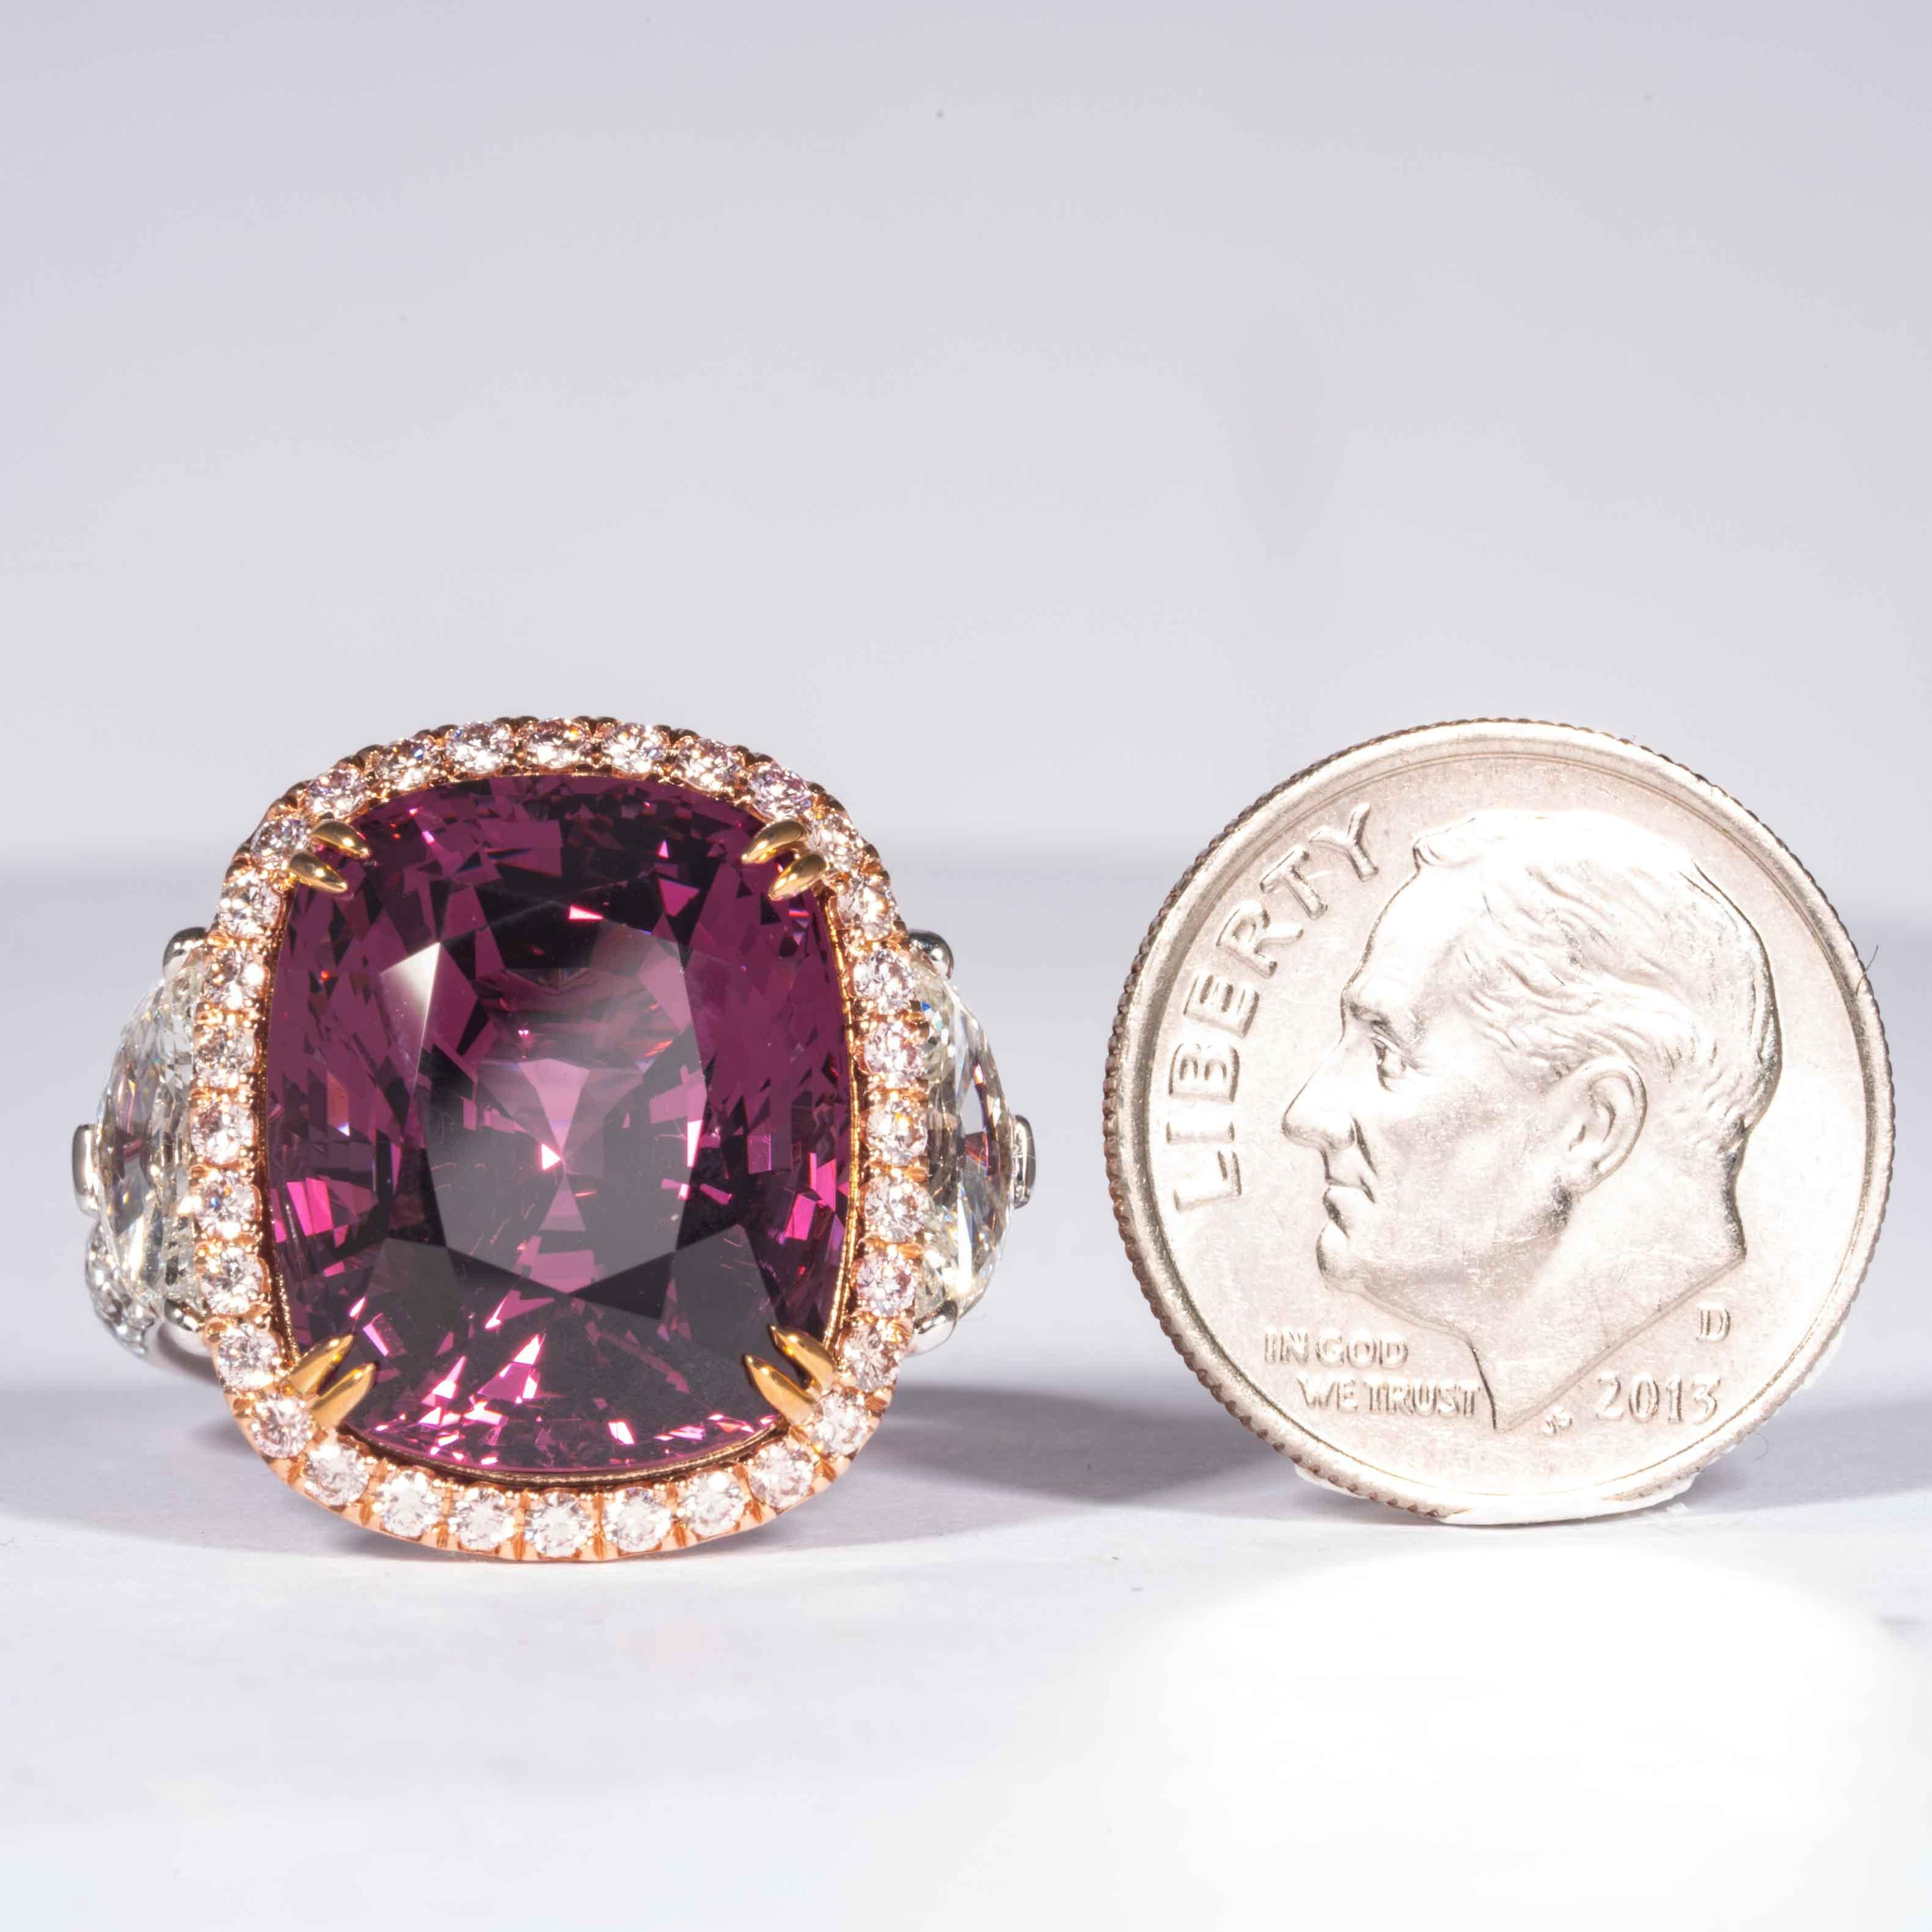 Shreve, Crump & Low 15.38 Carat Burmese Pink Spinel and Diamond Ring 'Dungaire' 2